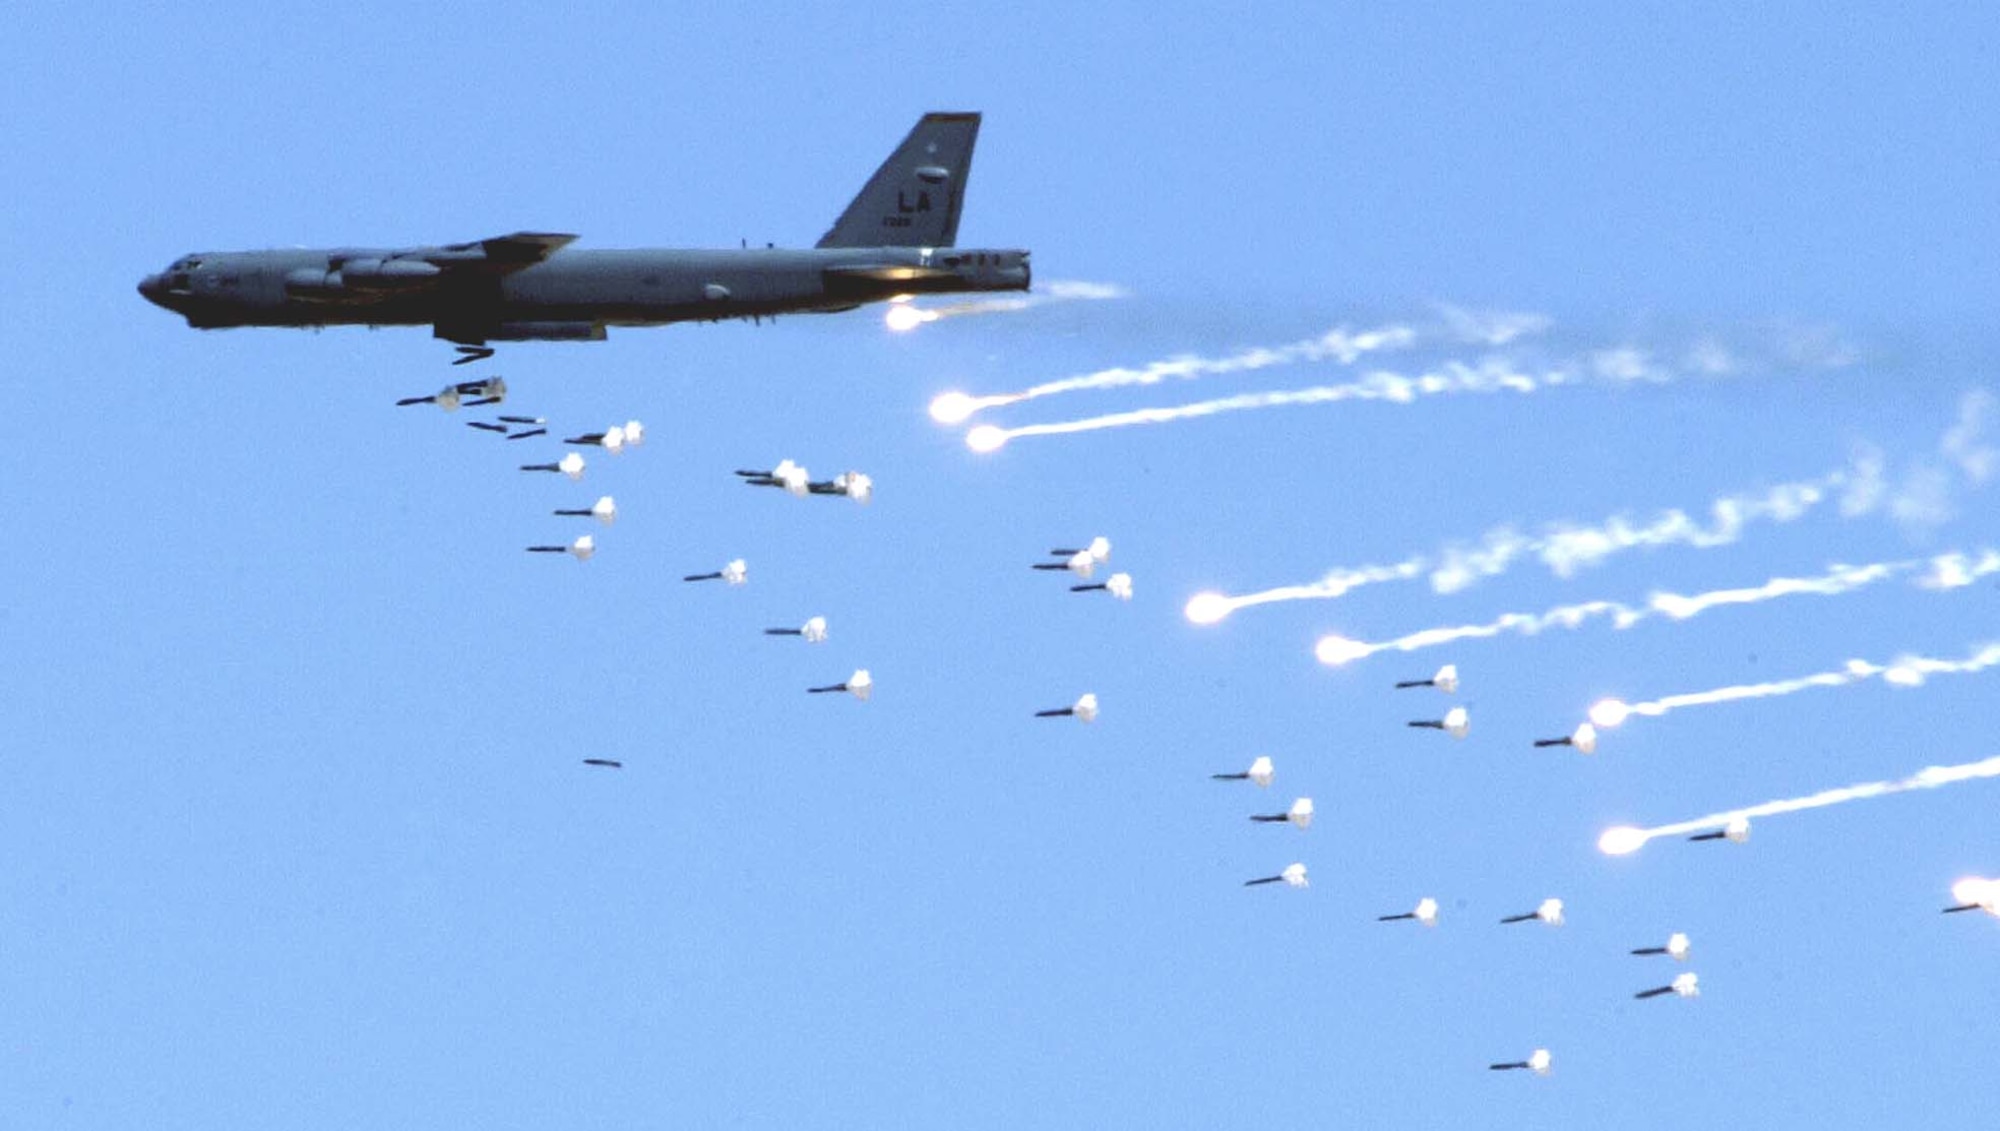 NELLIS AIR FORCE BASE, Nev. -- A B-52 Stratofortress from Barksdale Air Force Base, La., drops live ordnance over the Nevada Test and Training Range near here May 12 during an Air Force firepower demonstration.  The demonstration showcases the Air Force's air and space capabilities.  (U.S. Air Force photo by Senior Airman Brian Ferguson)                           